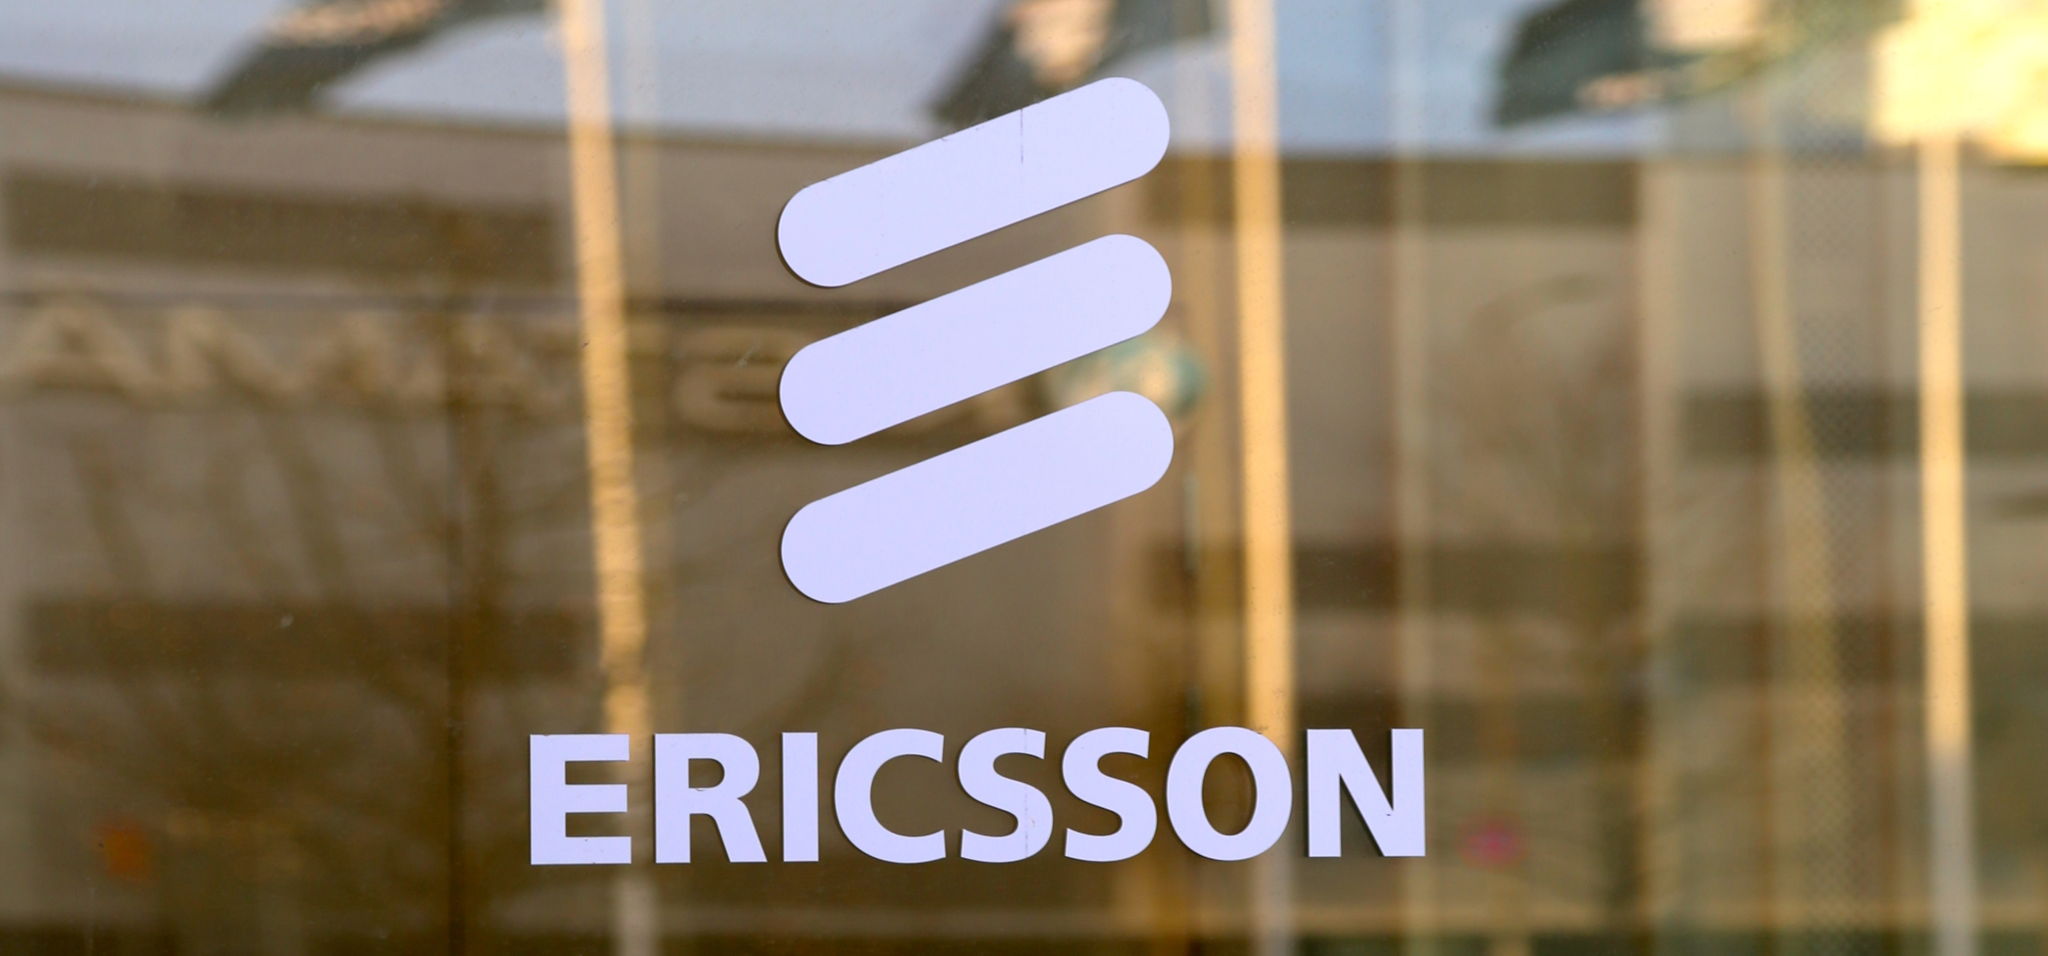 Ericsson Mobility Report: 5G to top one billion subscriptions in 2022